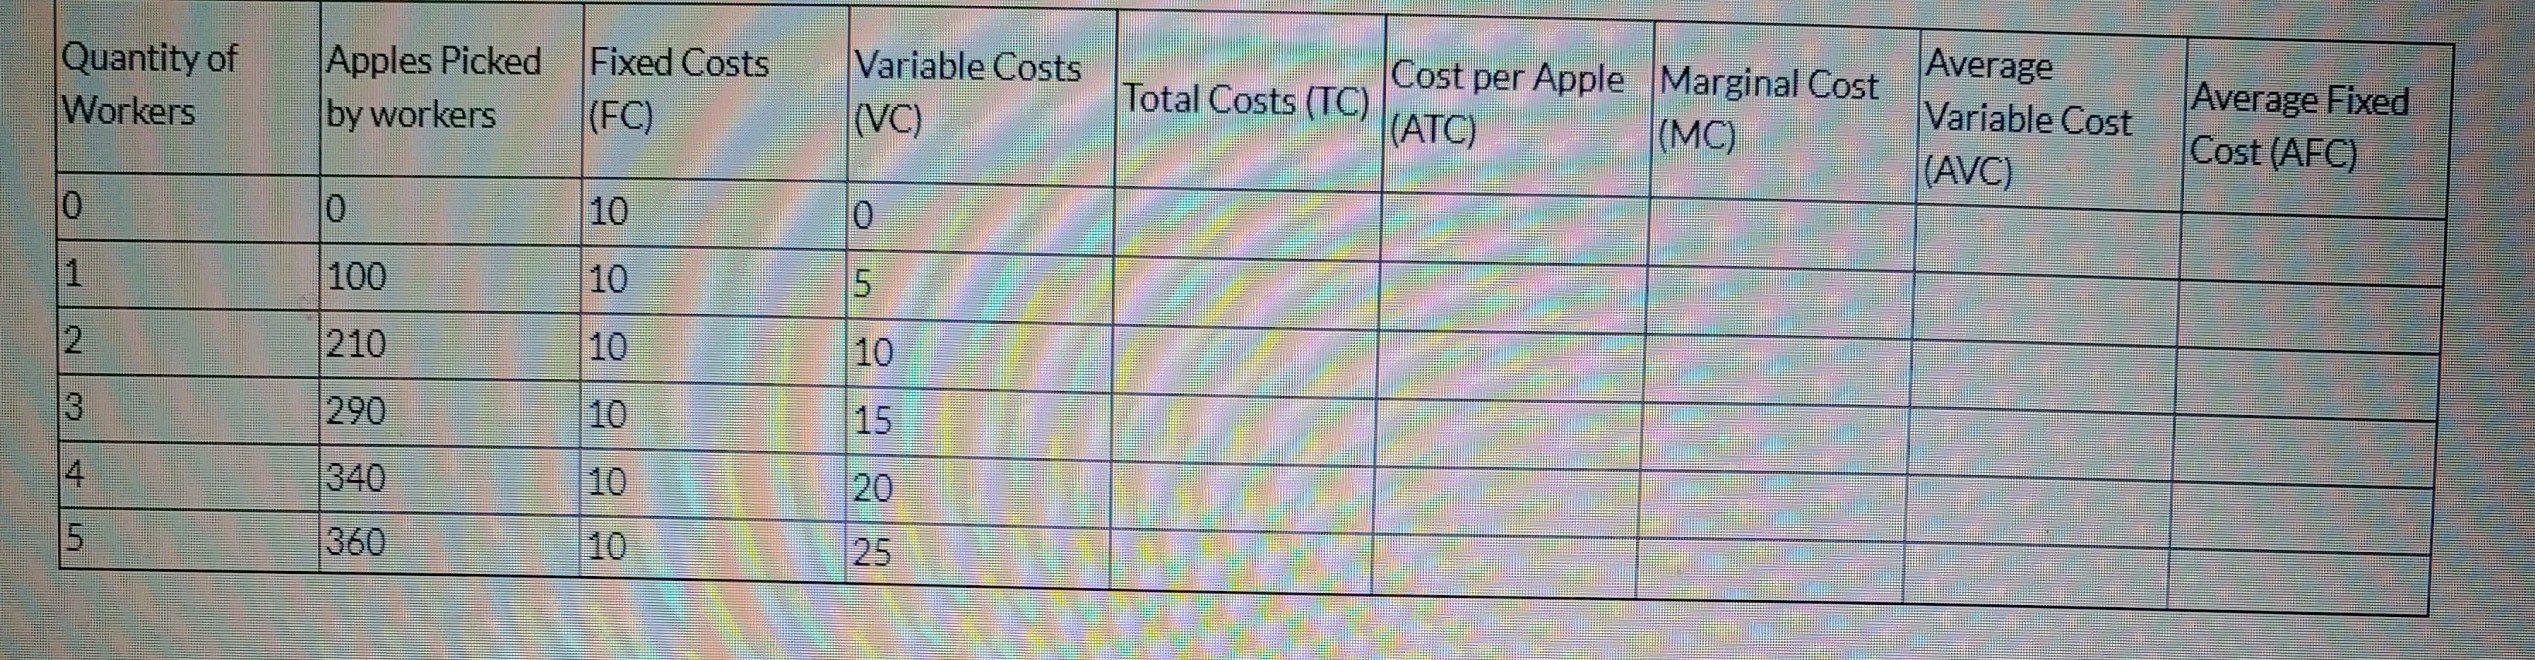 Quantity of
Workers
Apples Picked
Variable Costts
Average
Variable Cost
Fixed Costs
Cost per Apple Marginal Cost
(ATC)
Total Costs (TC)
Average Fixed
Cost (AFC)
by workers
(FC)
(VC)
(MC)
(AVC)
10
100
10
210
10
10
290
10
15
4
340
10
20
5.
360
10
25
